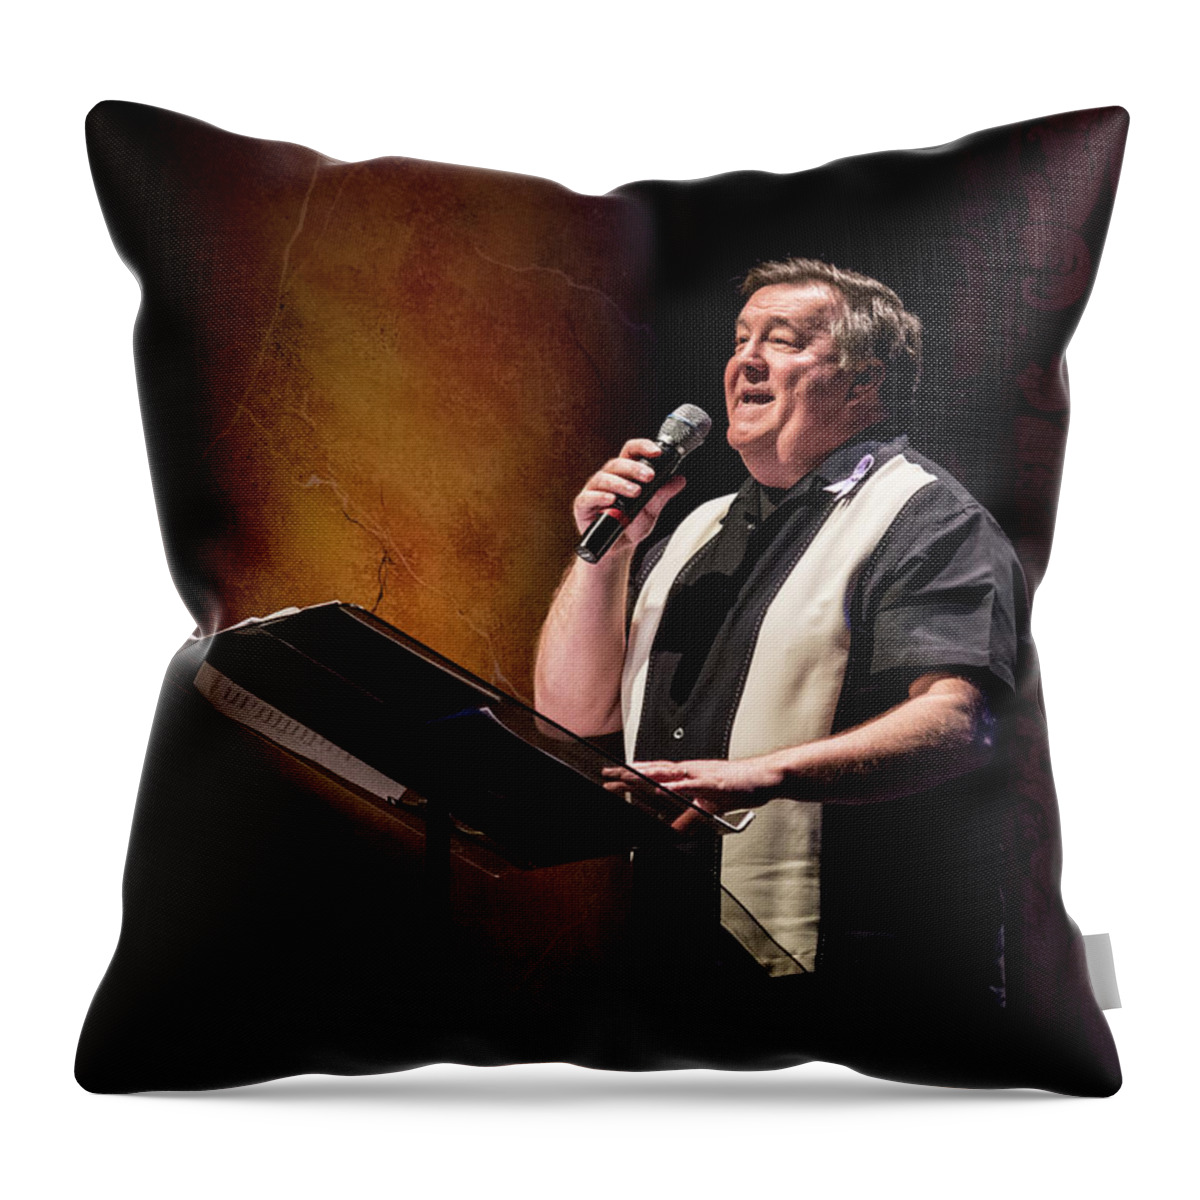 From The Totem Pole High School Production Awards. Throw Pillow featuring the photograph Rowan Joseph by Andy Smetzer